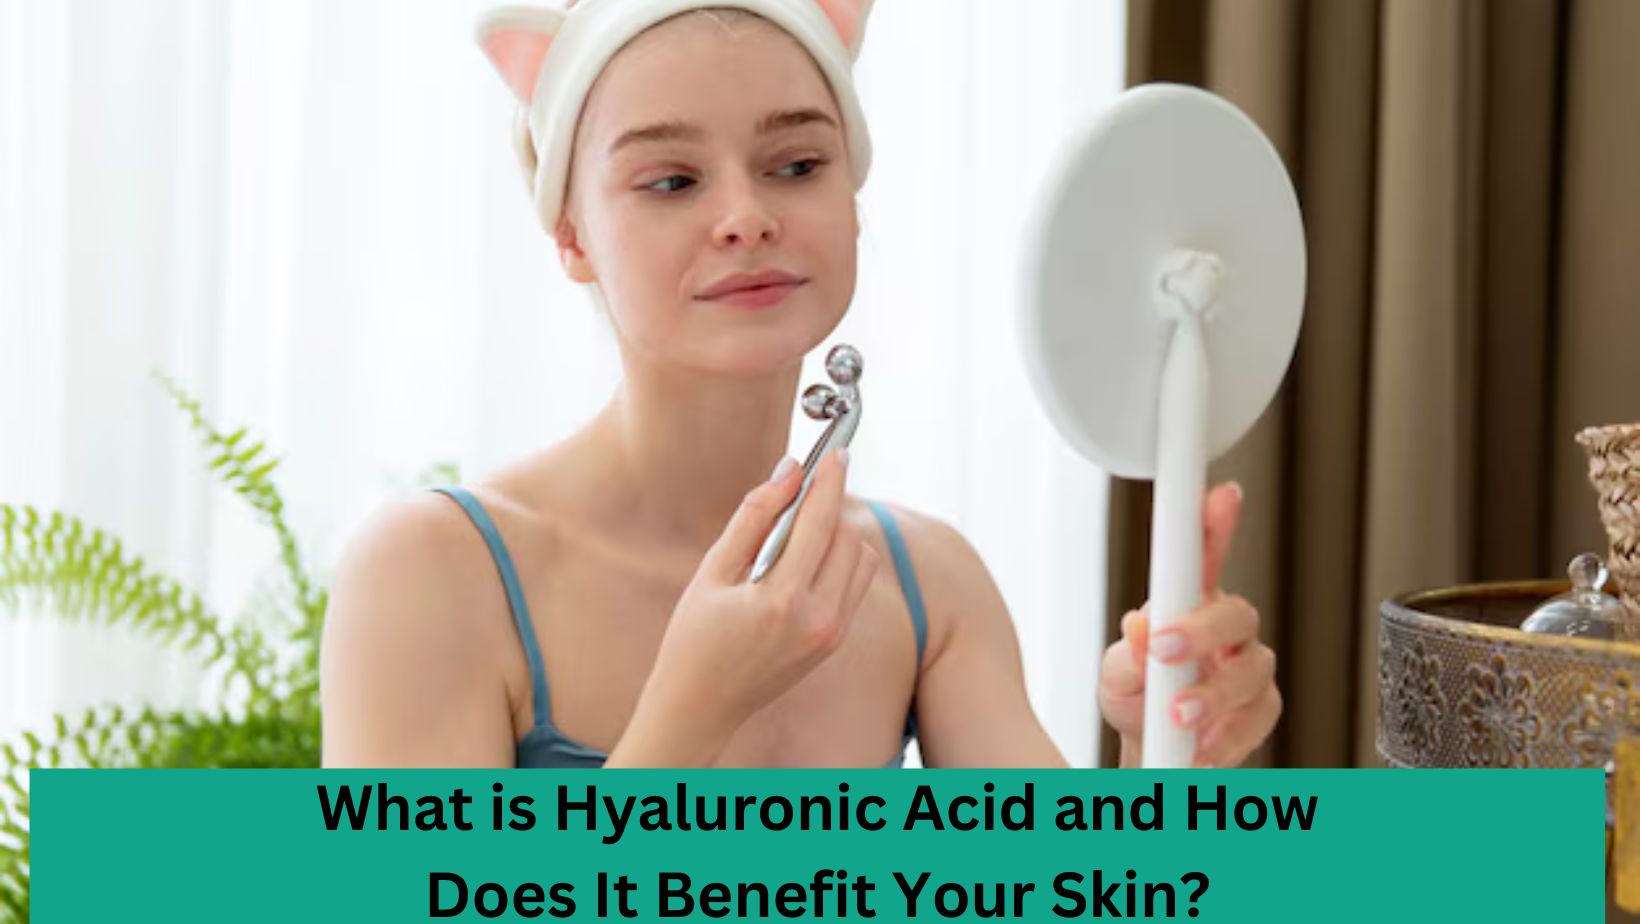 What is Hyaluronic Acid and How Does It Benefit Your Skin?